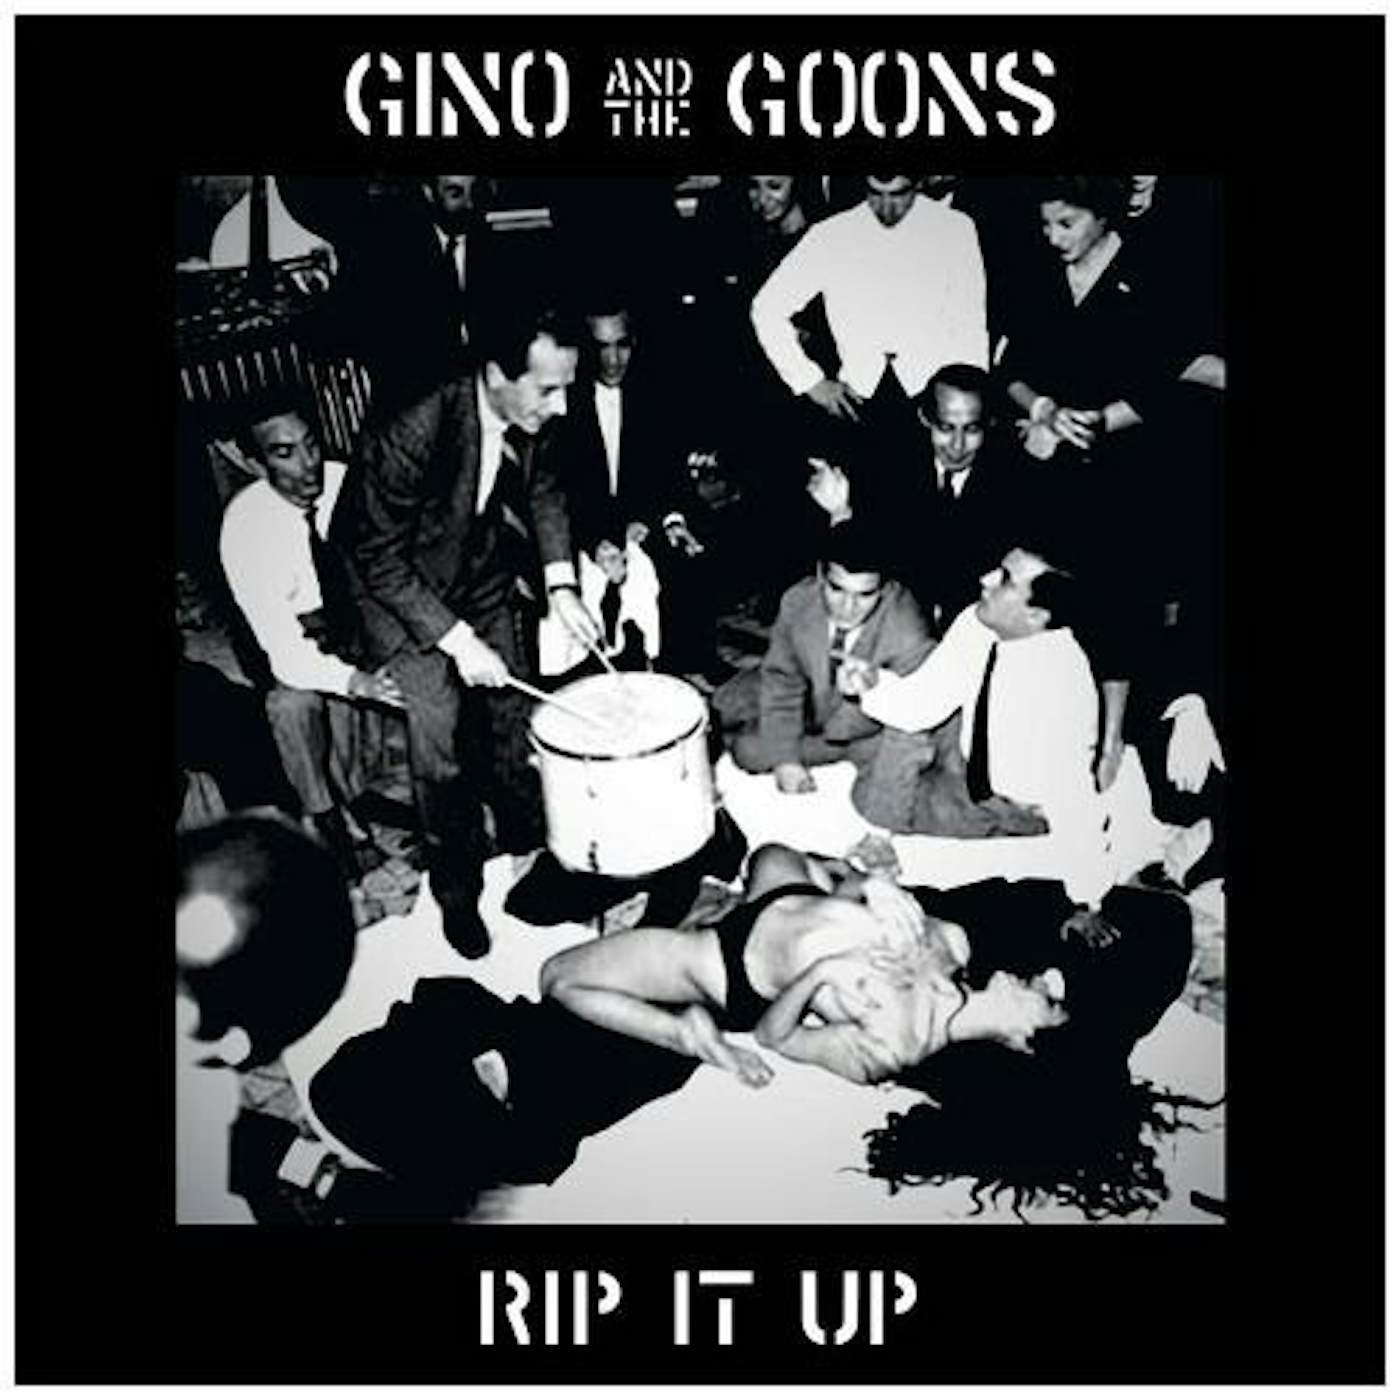 Gino and the Goons Rip It Up Vinyl Record